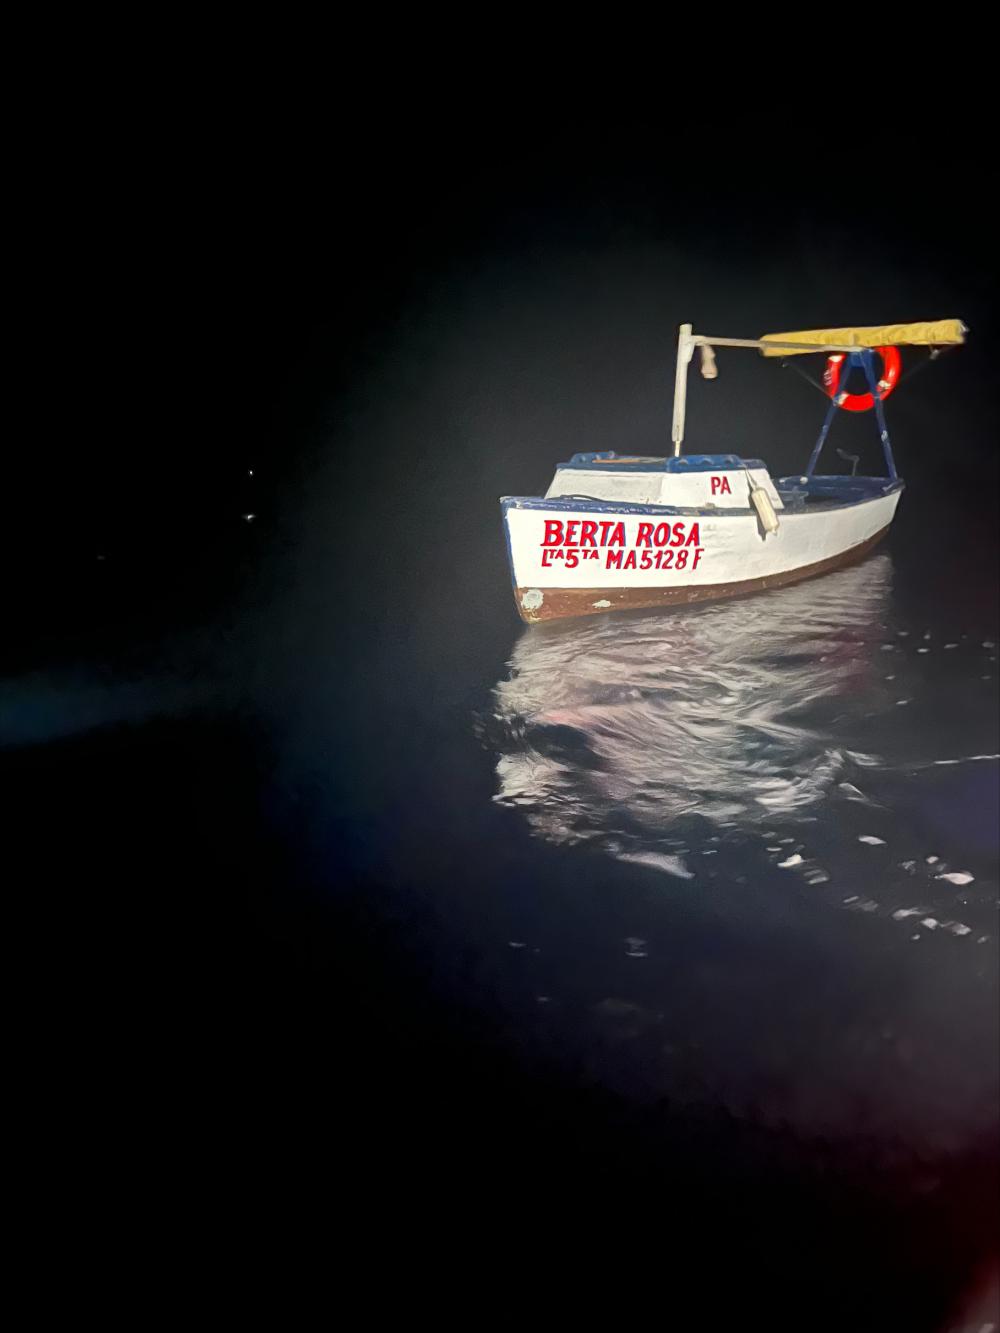 A Customs and Border Protection Air and Marine Operations aircrew alerted Sector Key West watchstanders of this fishing vessel about 12 miles south of Boot Key, Florida, Aug. 15, 2022. The people were repatriated to Cuba on Aug. 19, 2022. (U.S. Coast Guard photo)